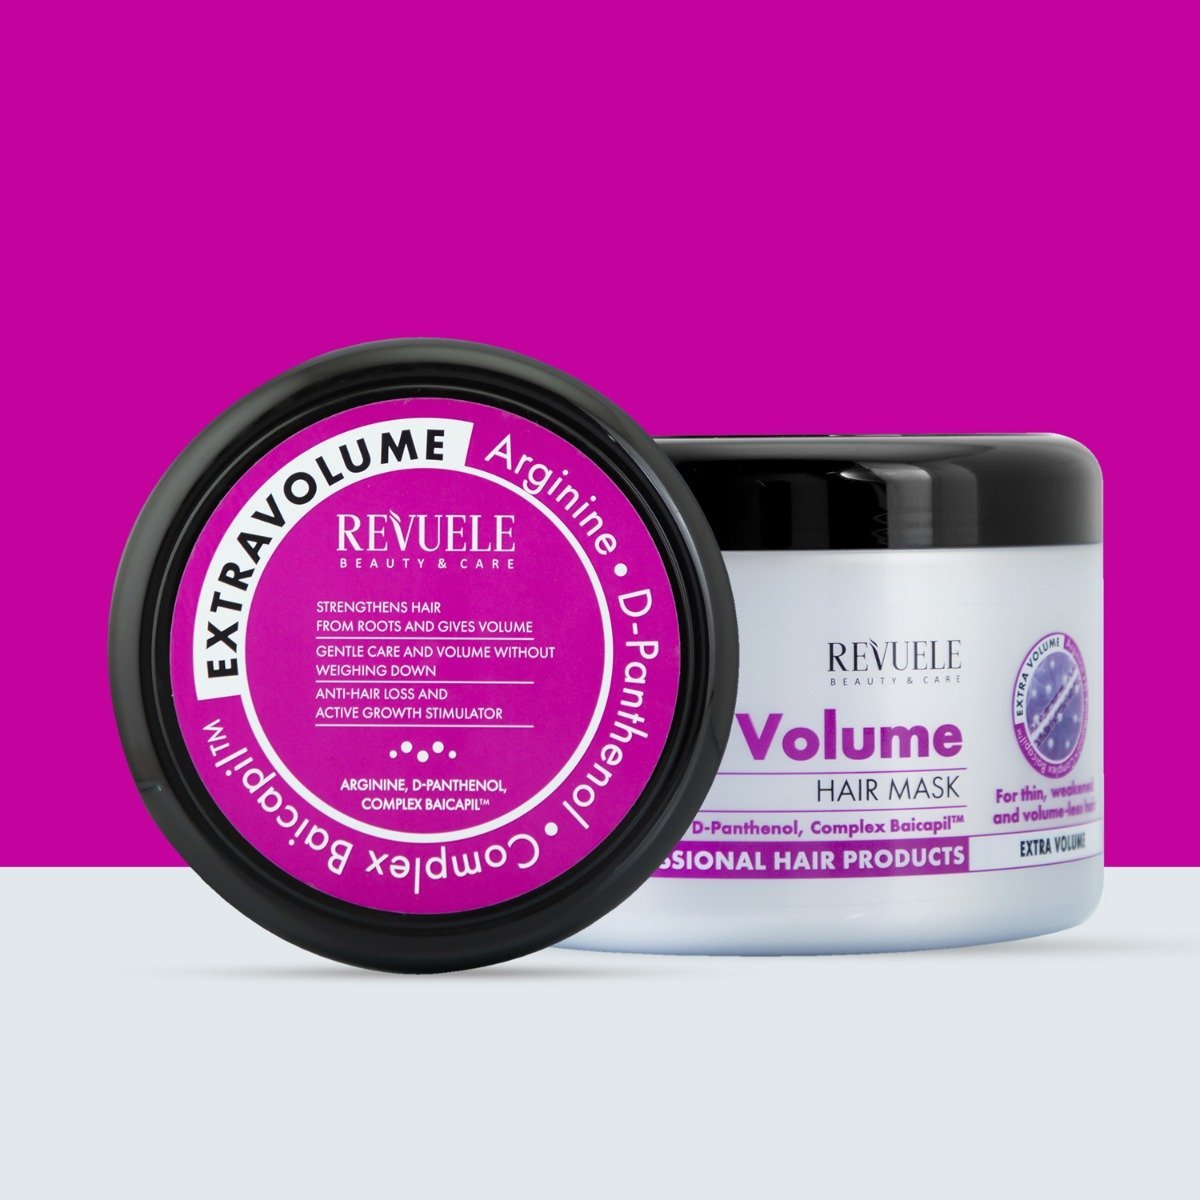 Revuele Extra Volume Hair Mask For Thin, Weak And Deprived Hair